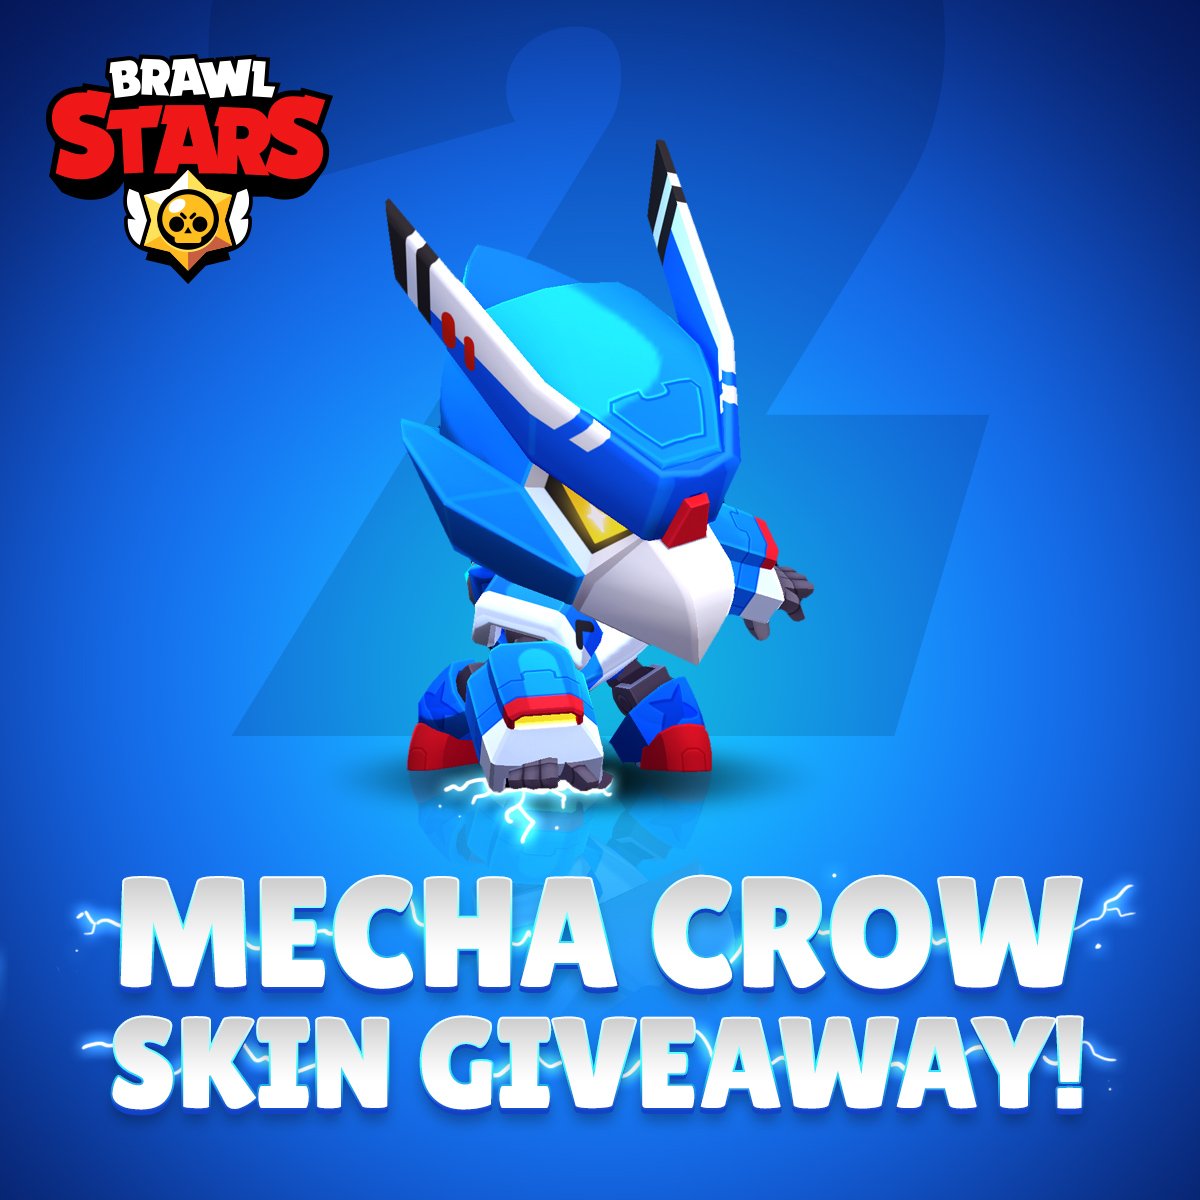 Brawl Stars On Twitter Let S Get To 2 Million Subs Subscribe To Https T Co Vk3uuiccrf And Comment Here Https T Co Gzup4er3yz For A Chance To Win Crow And His Brand New Mecha Skin Https T Co M1jepyl27p - new crow skin brawl stars